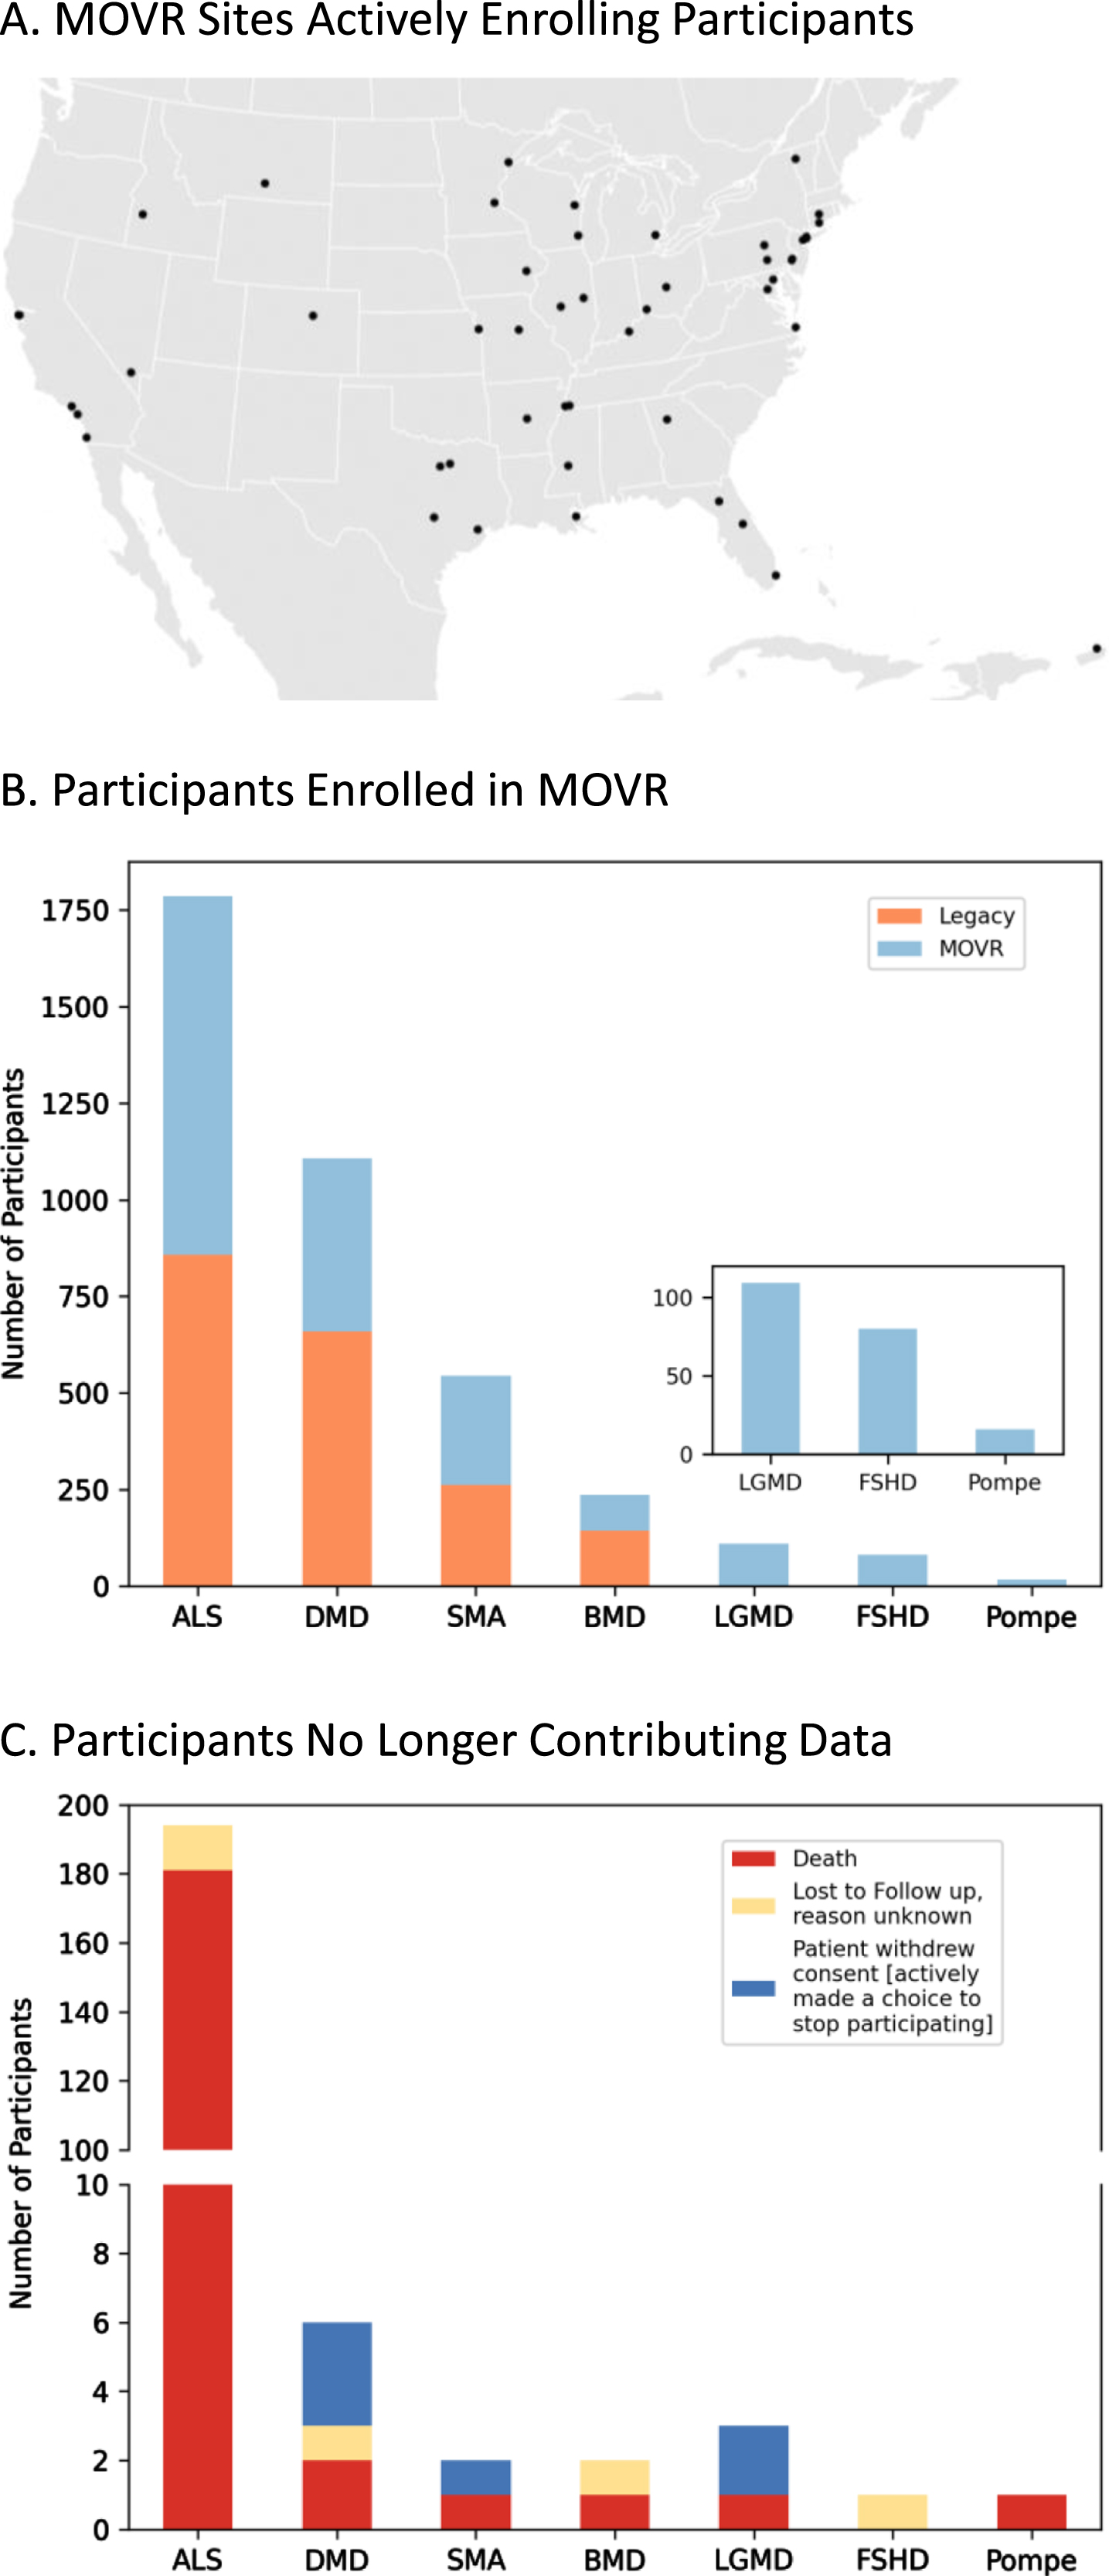 MOVR sites have actively enrolled participants across 7 NMDs. (A) Participants enrolled in MOVR vs those whose data were migrated from the legacy USNDR study. The total number of participants for ALS, DMD, SMA, BMD, LGMD, FSHD, and Pompe is 1,787, 1,107, 544, 237, 109, 80, and 16 respectively. Note that LGMD, FSHD, and Pompe were not collected in the USNDR dataset. (B) Participants who were no longer contributing data due to death, lost to follow up, or withdrawing consent. The number of participants no longer contributing data into MOVR was 209 (n = 194 ALS, n = 6 DMD, n = 2 SMA, n = 2 BMD, n = 3 LGMD, n = 1 FSHD, and n = 1 Pompe).